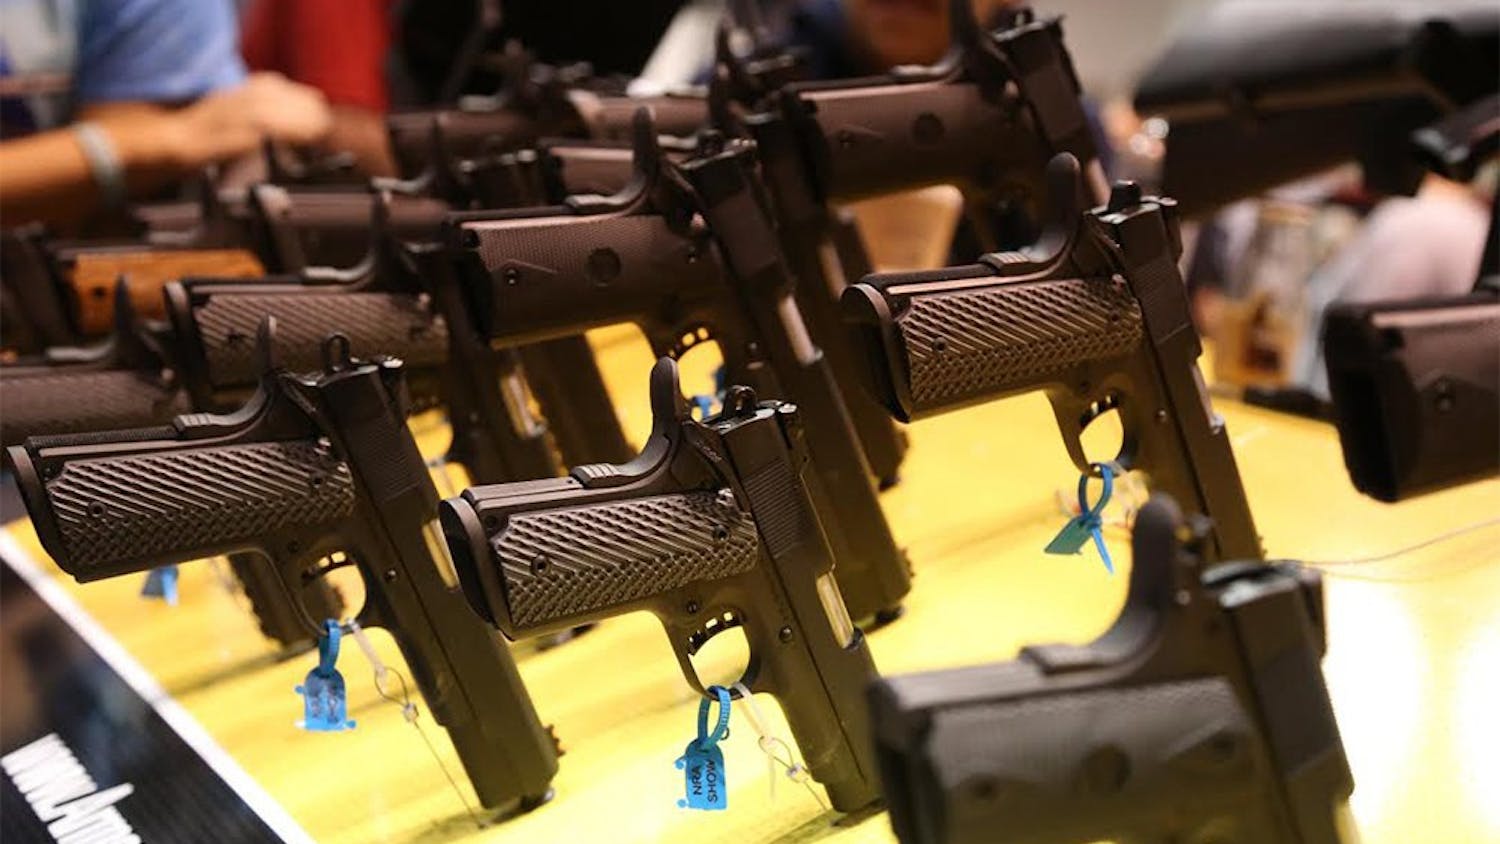 Firearms and related products were displayed and speakers discussed gun-related issues at the 143rd NRA Annual Meeting & Exhibits at the Indiana Convention Center.